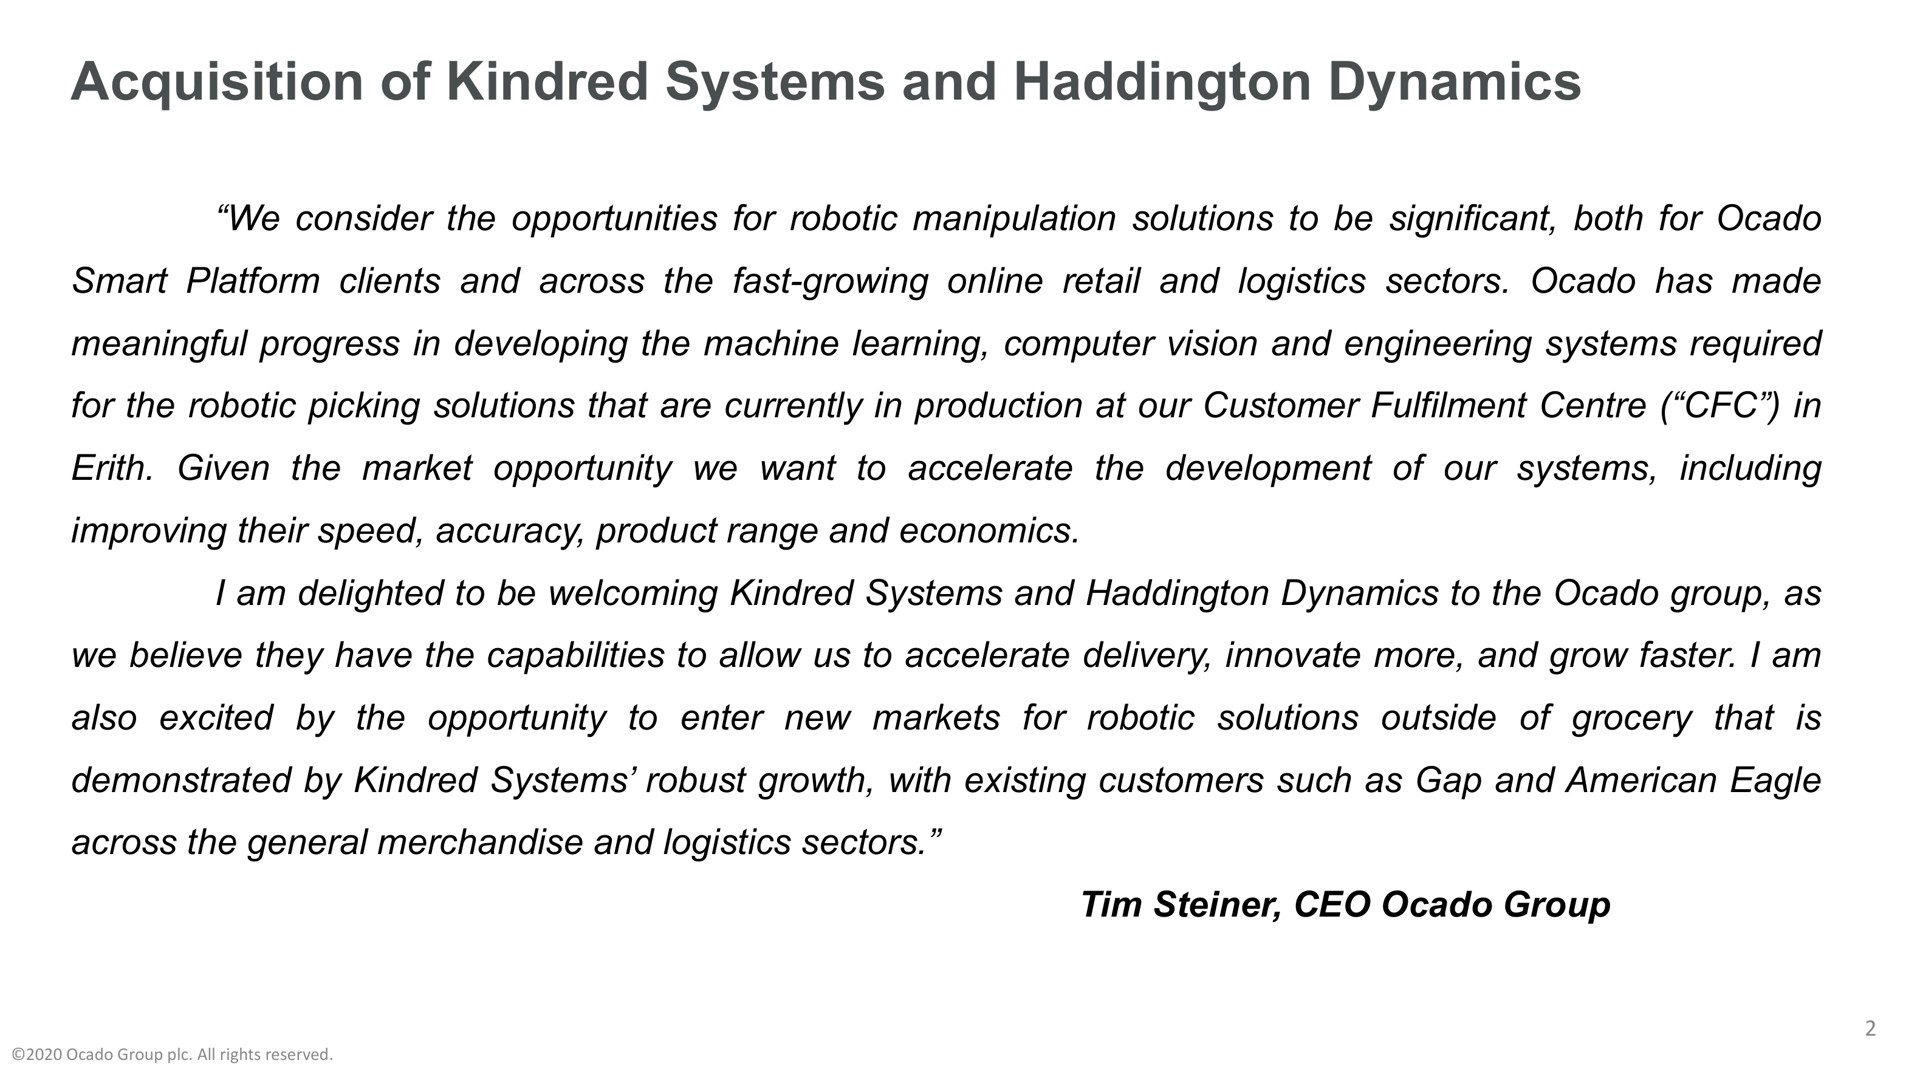 acquisition of kindred systems and dynamics | Ocado